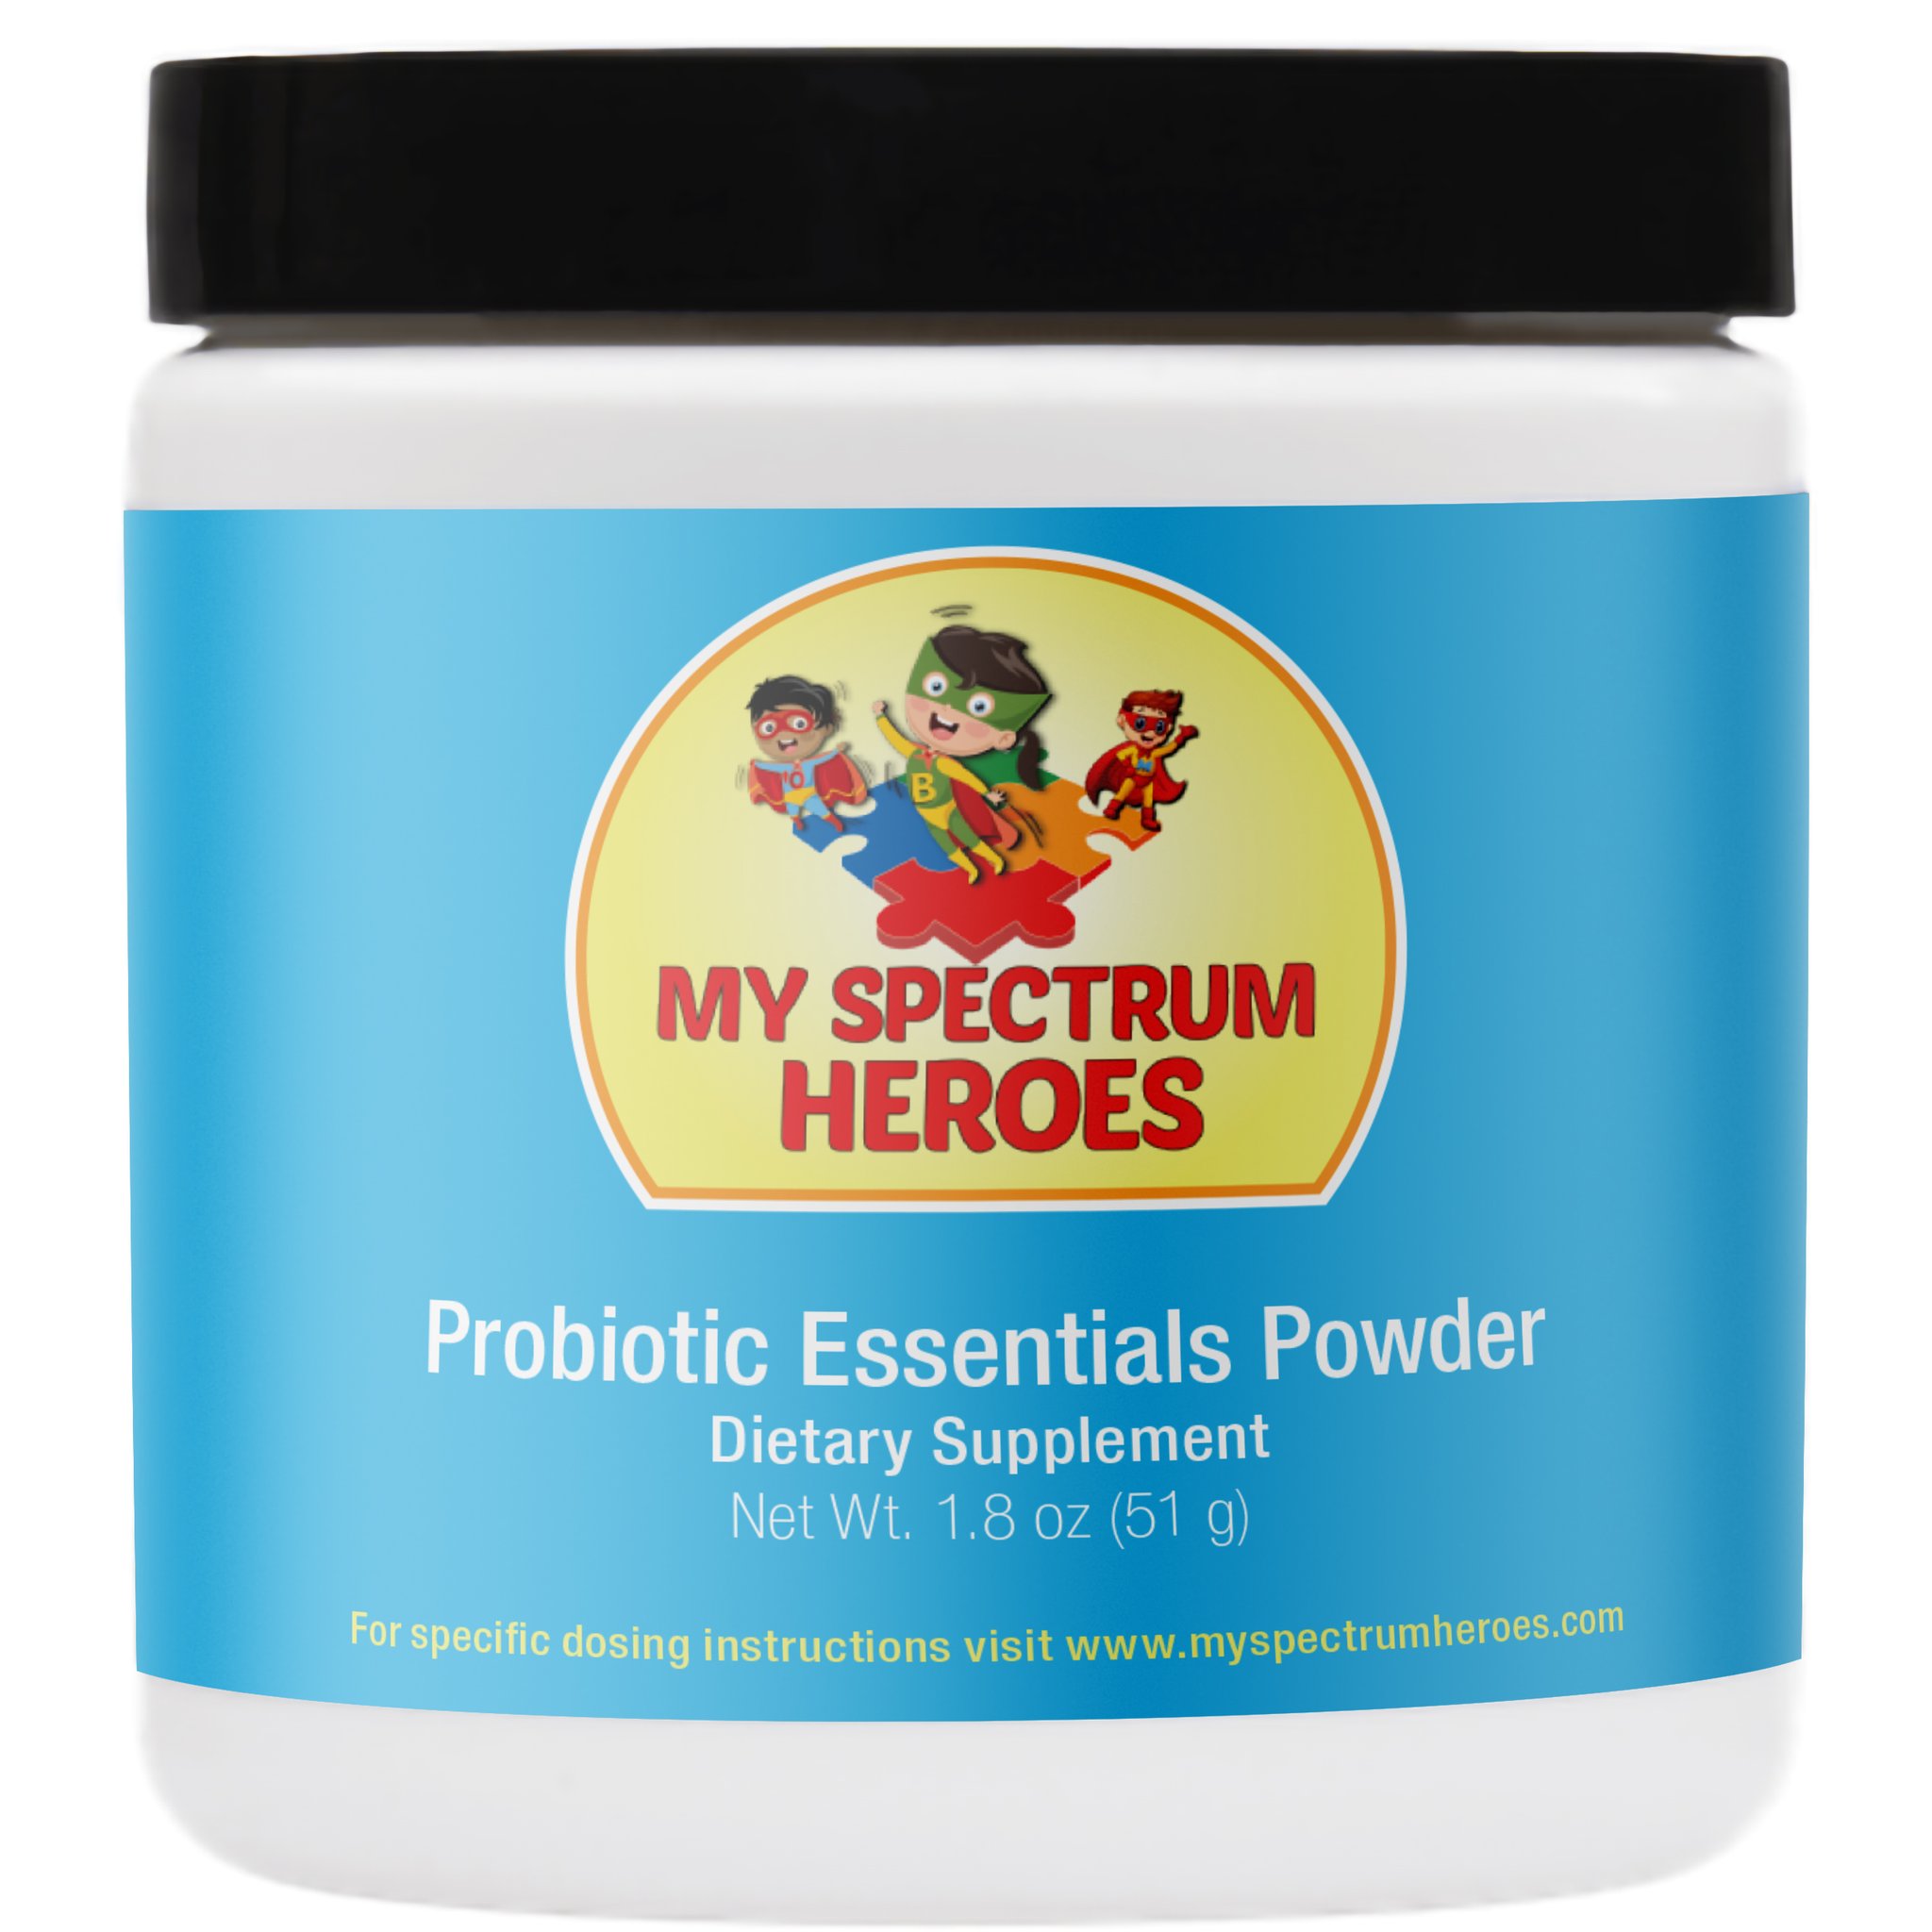 Probiotic Essentials Powder for Children with Autism and ...